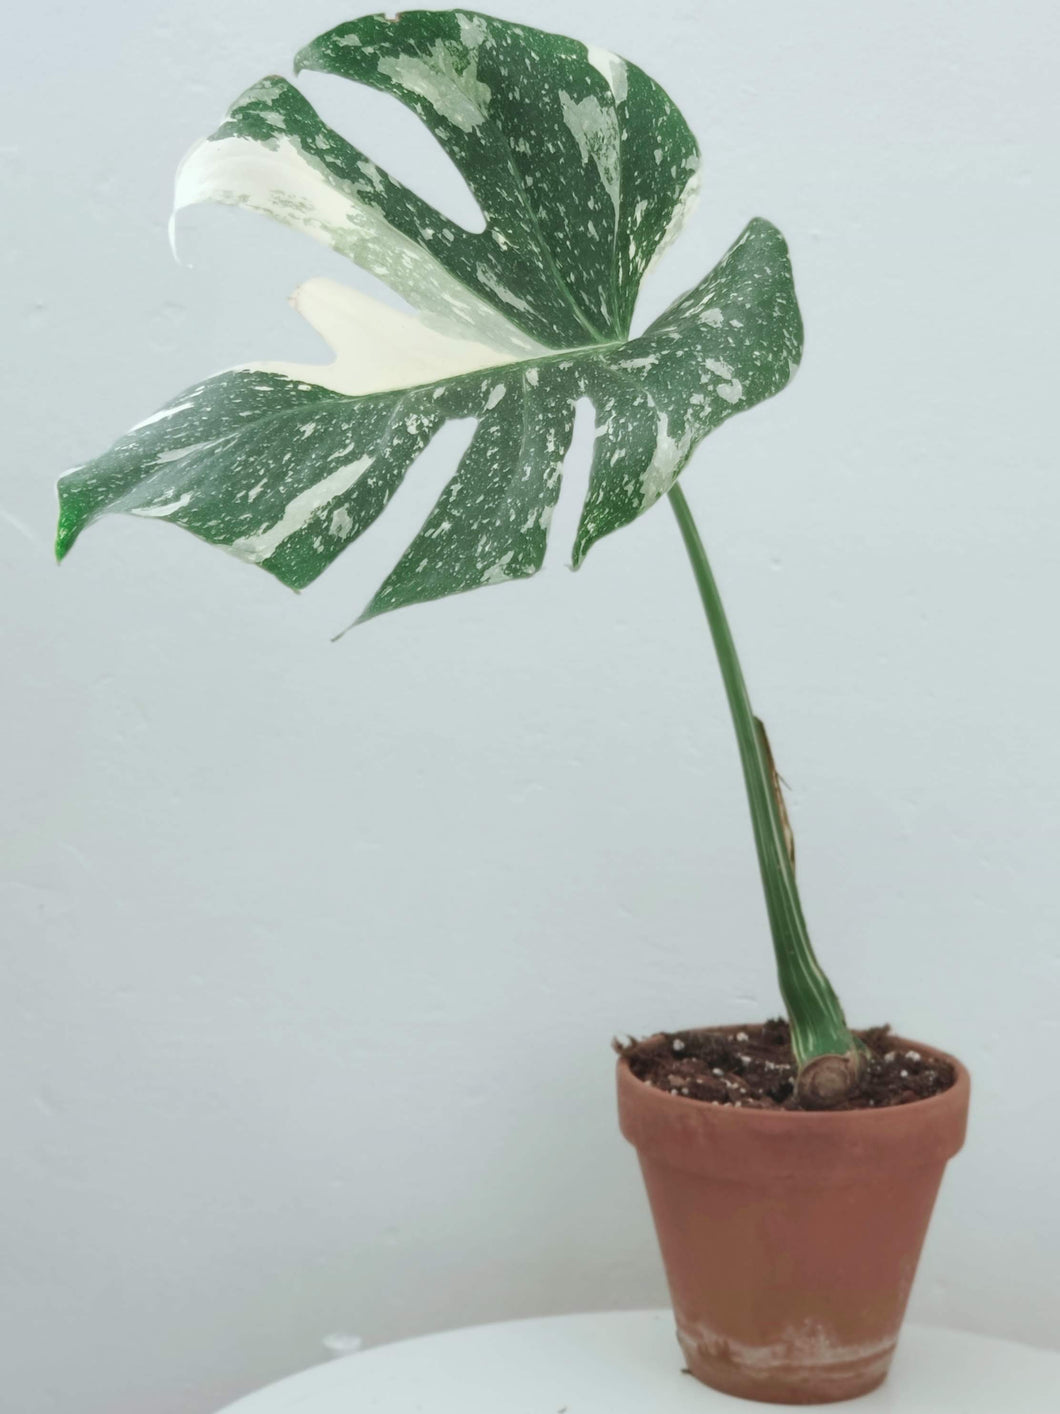 Monstera Deliciosa 'Thai Constellation' - Rooted Cutting (L)